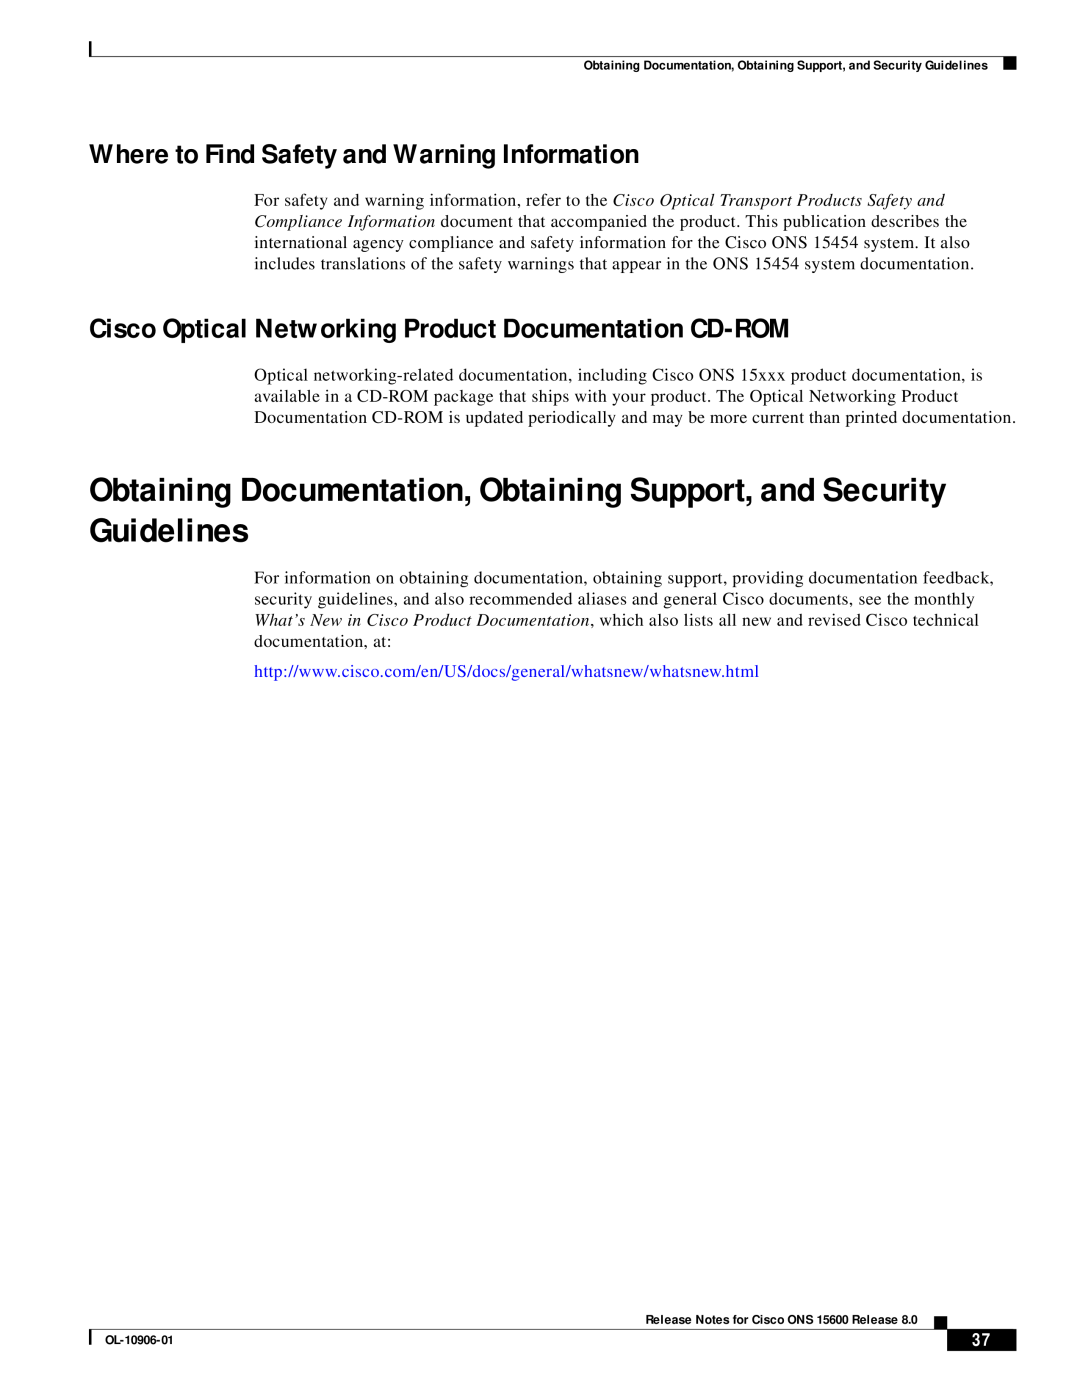 Cisco Systems ONS 15600 manual Obtaining Documentation, Obtaining Support, and Security Guidelines 